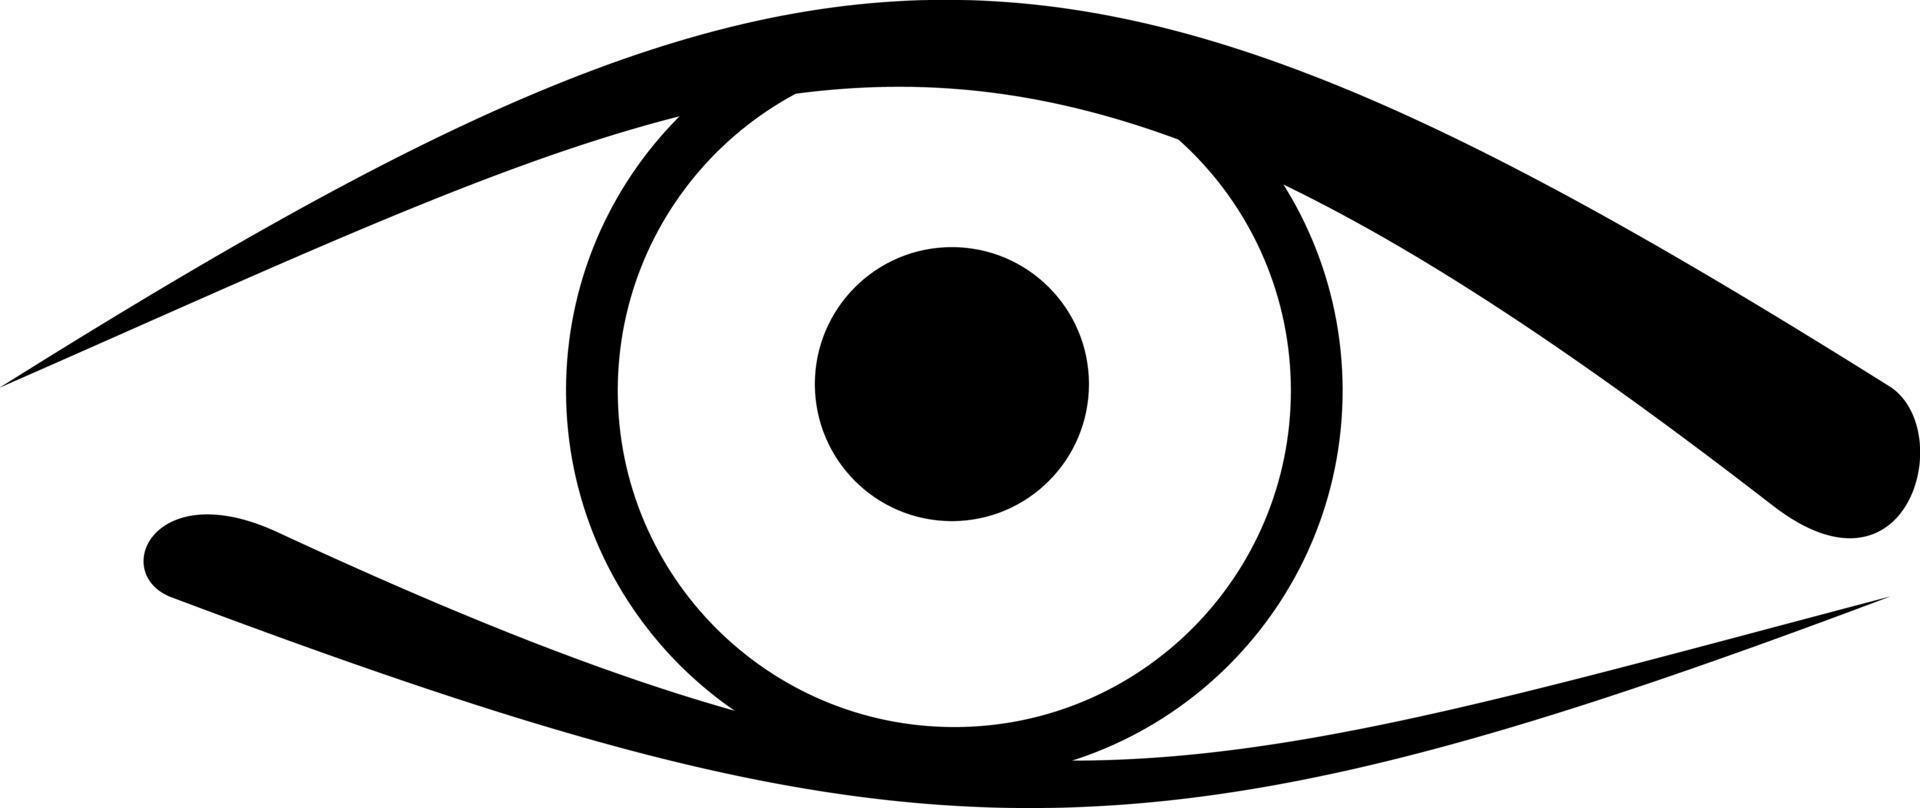 Eye icon open eyes images vector